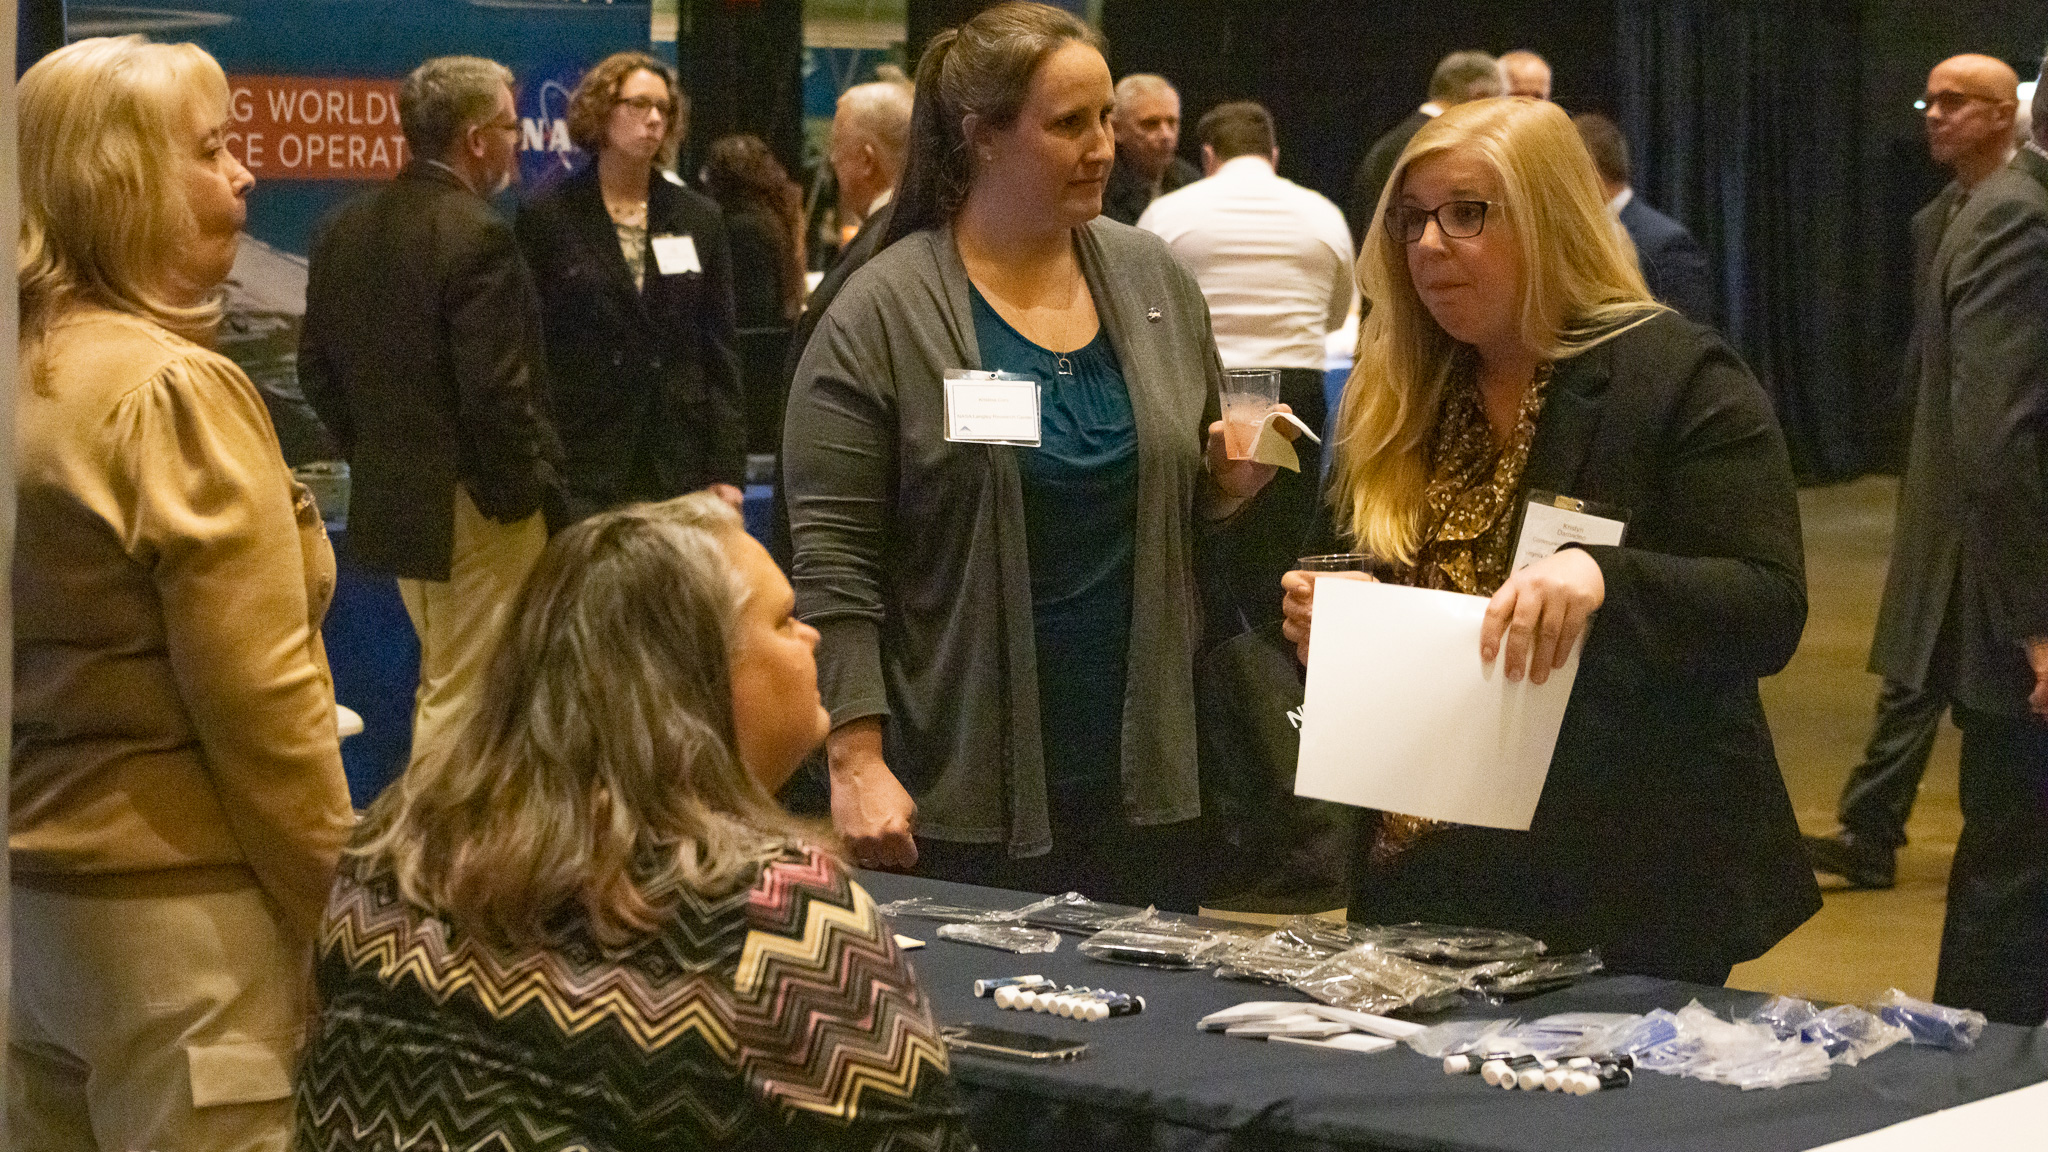 SSAI was one of 50 exhibitors. Pamila Ashworth, Cassie Lehnhardt, and Kristina Cors are seen here interacting with a fellow attendee.